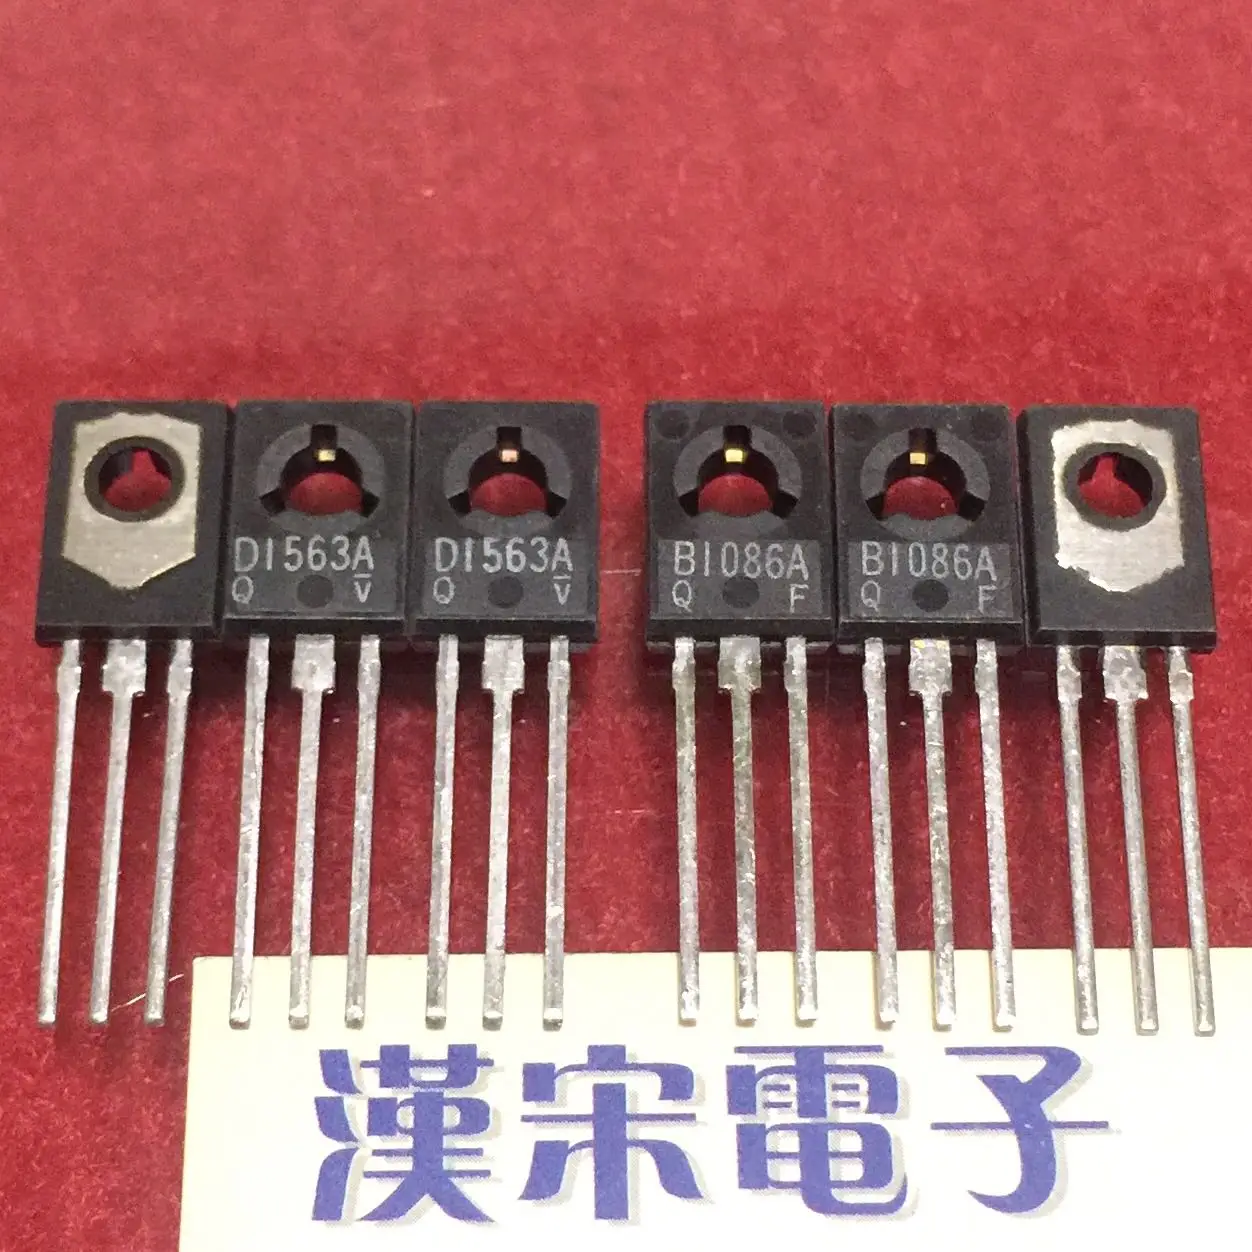 

Free shipping 2SB1086A/2SD1563A/B1086A/D1563A 8 5 pairs/package